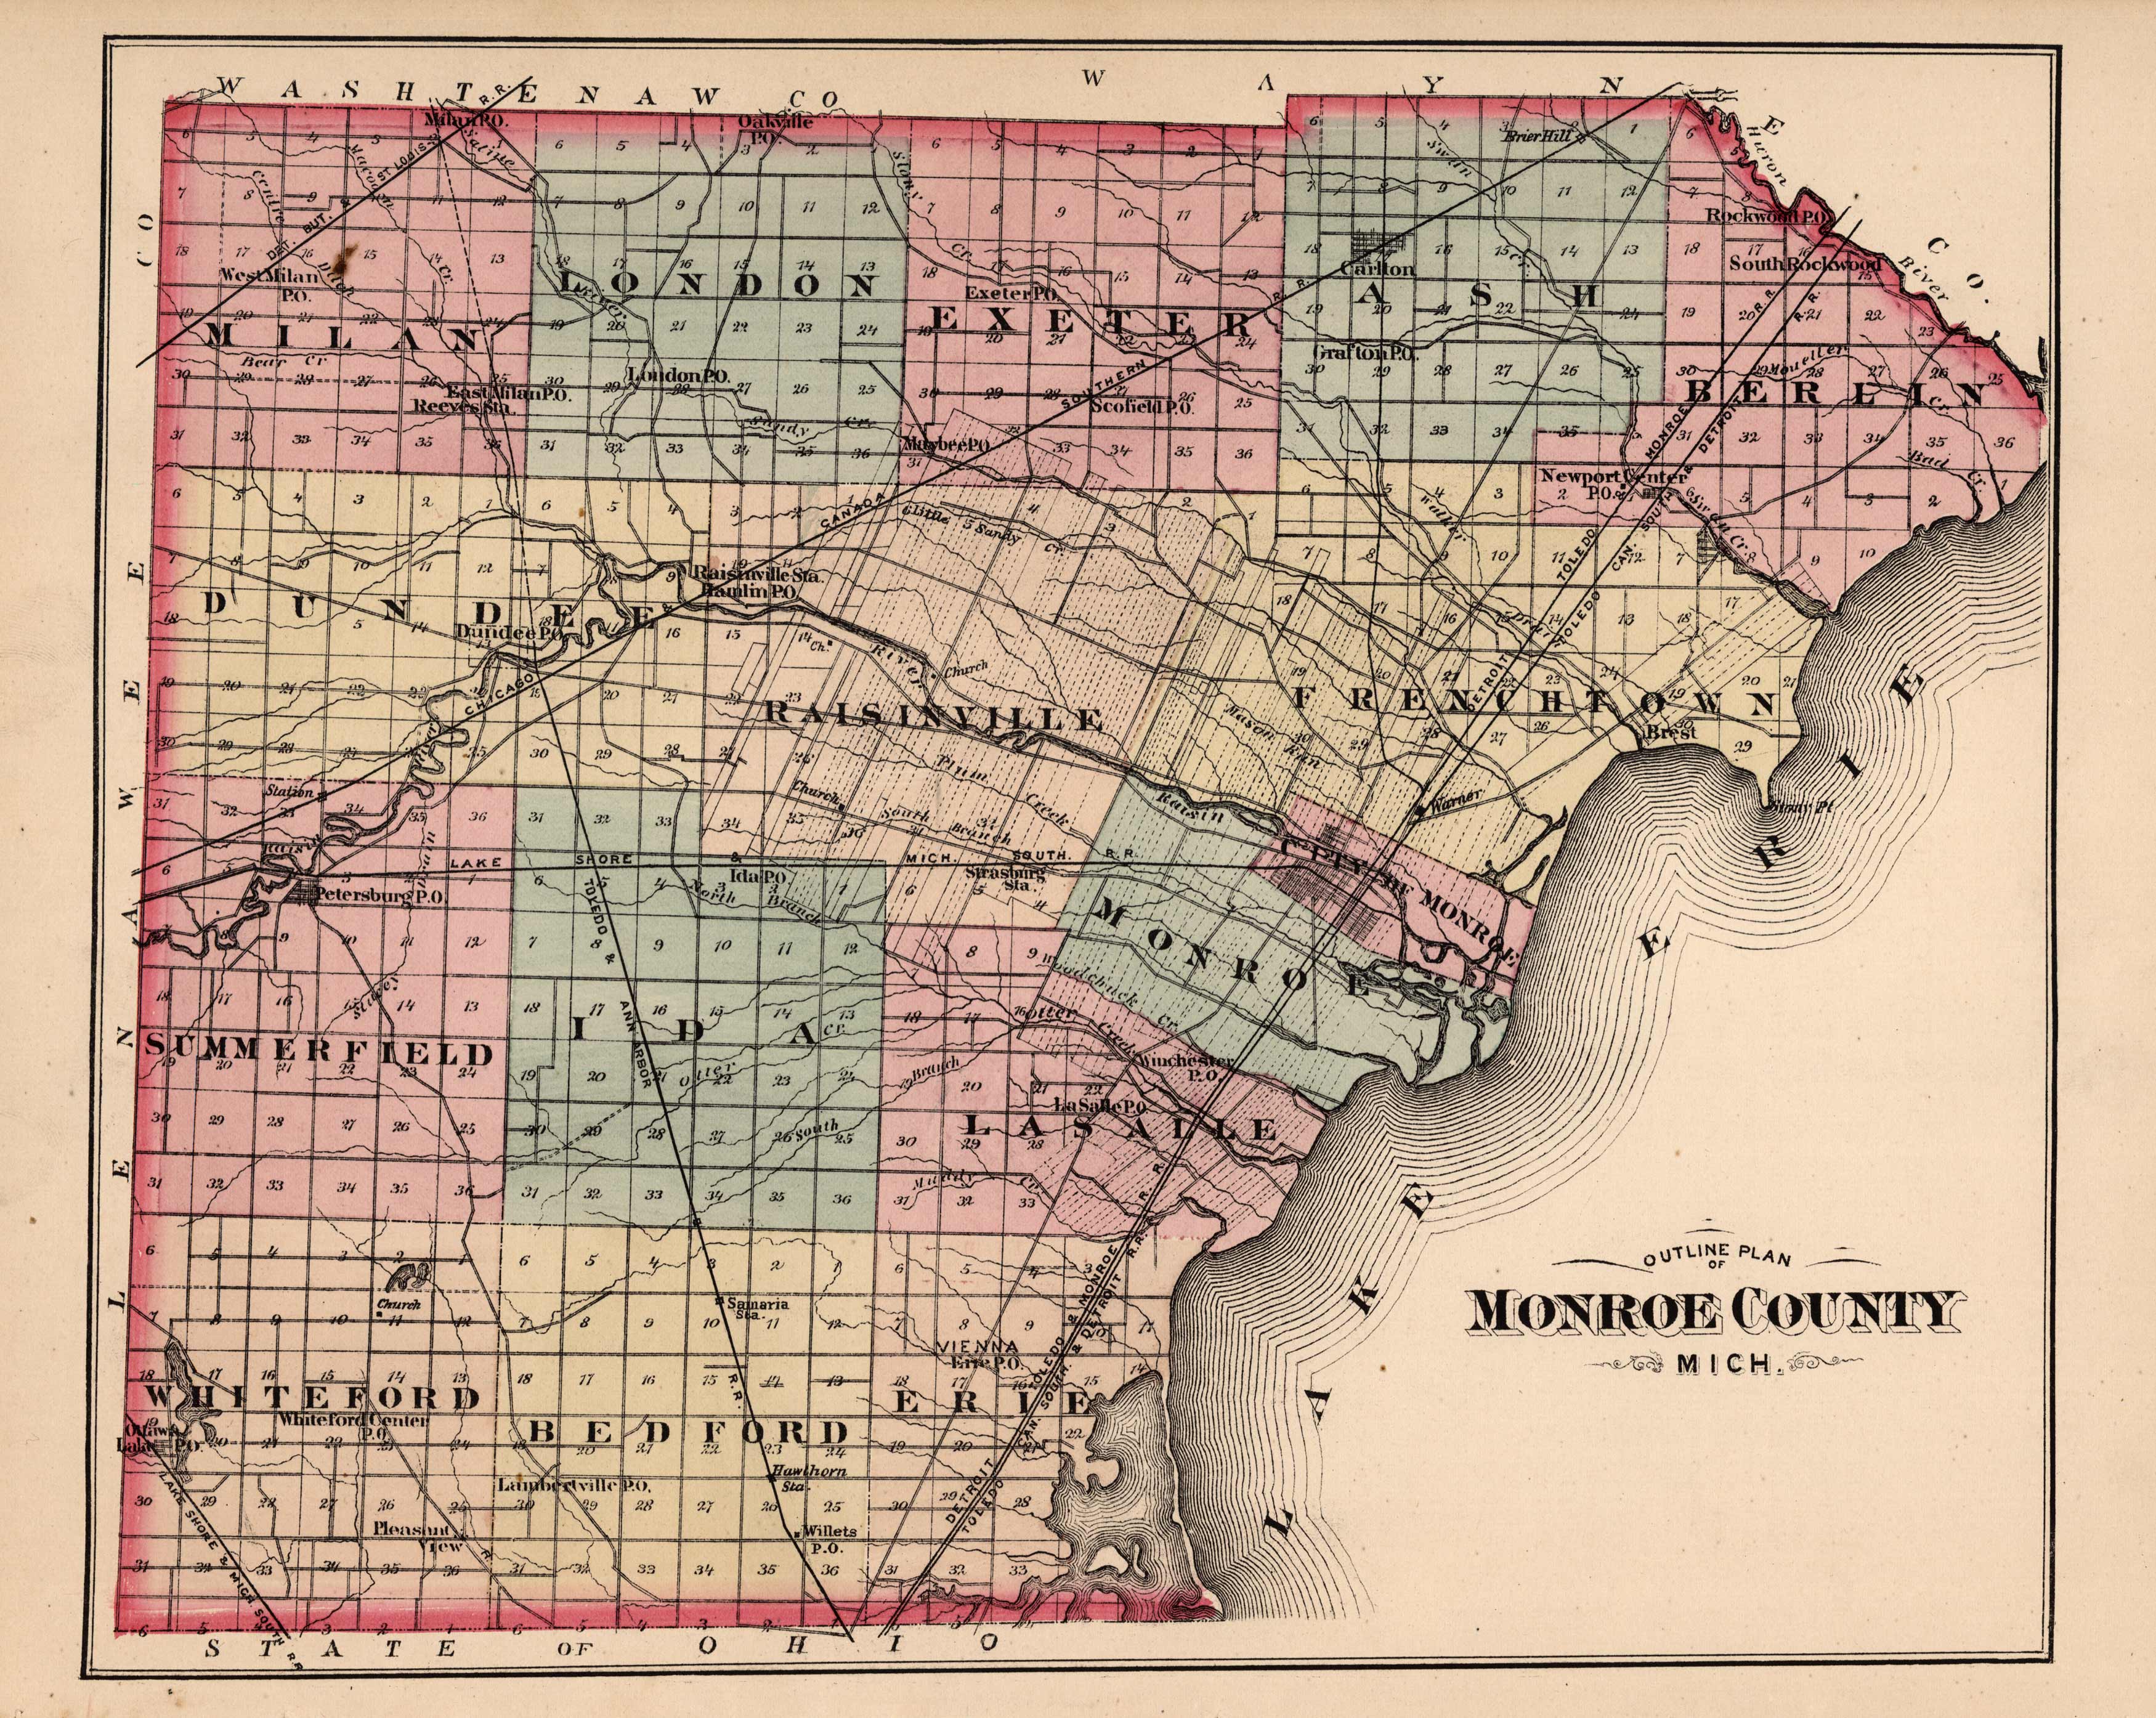 Outline Plan of Monroe County